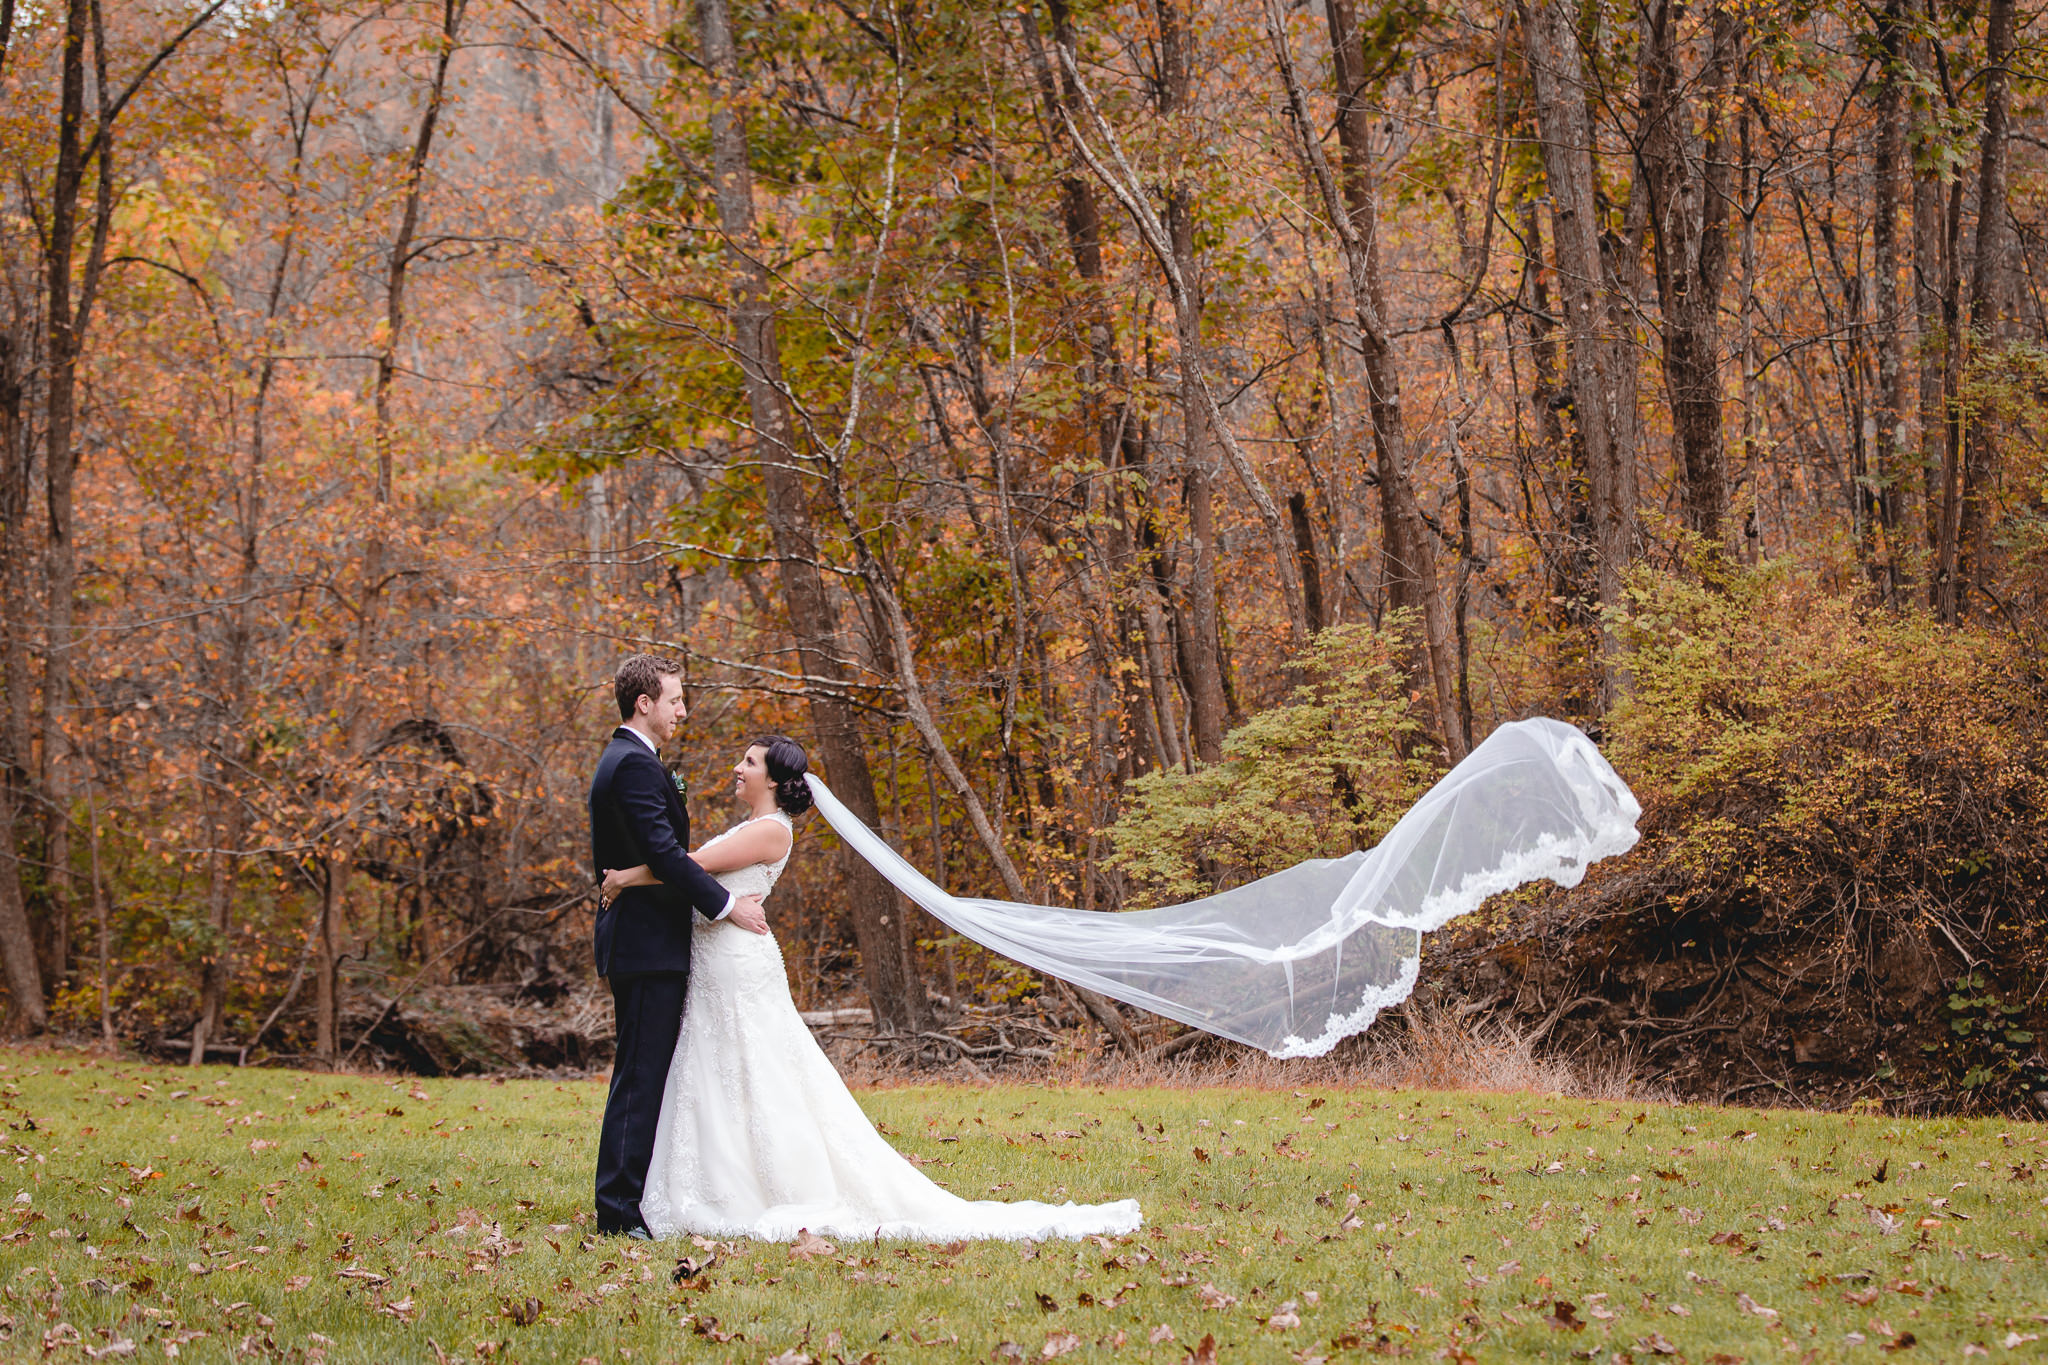 Bride and groom stand in the park with her cathedral veil blowing in the wind